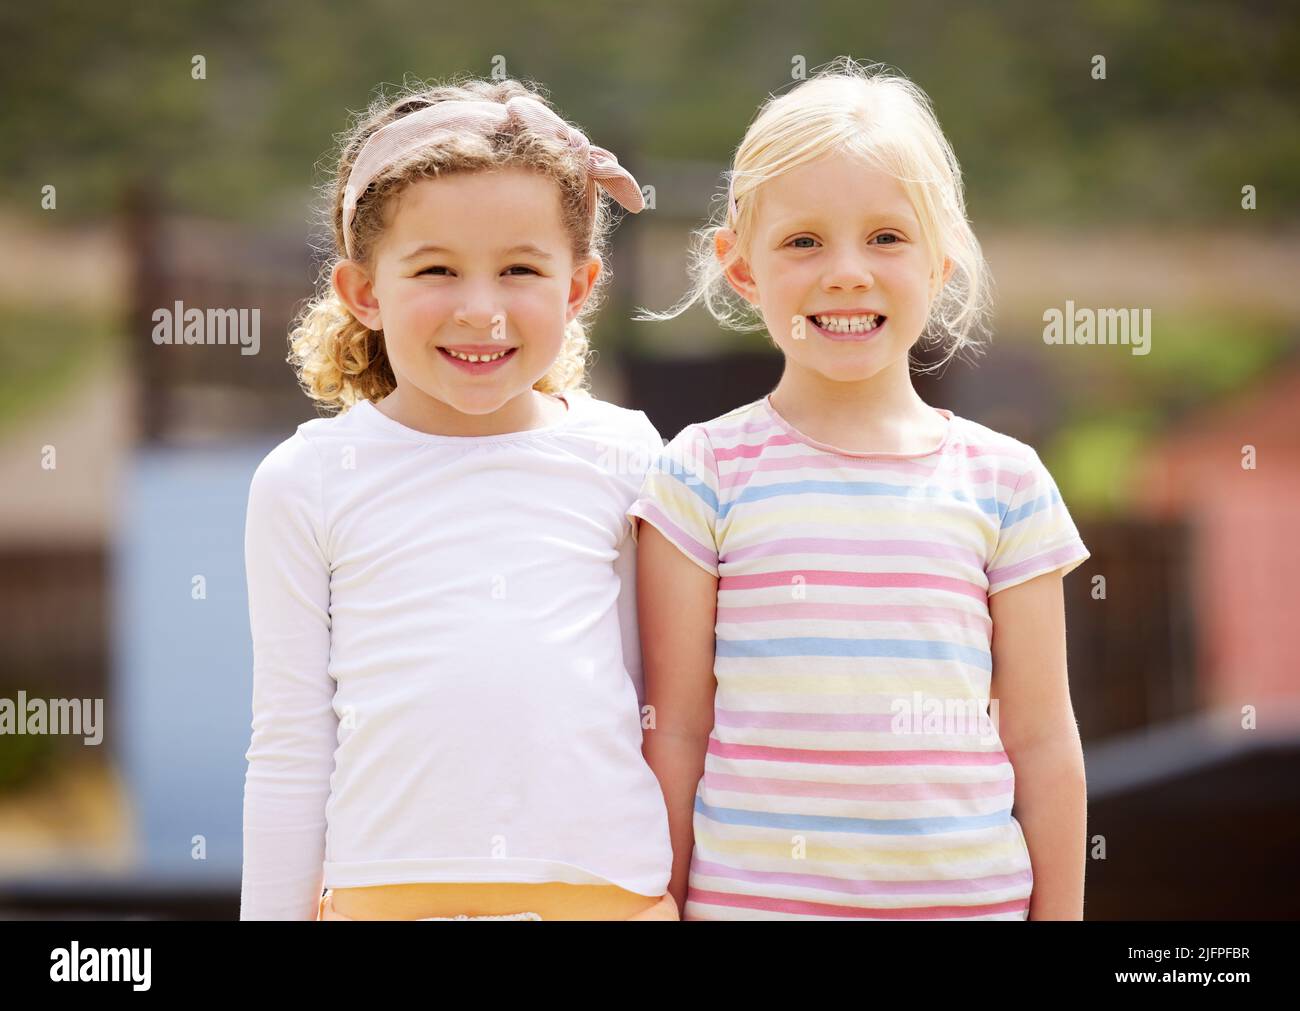 We love doing the same things. Shot of two little girls standing together outside. Stock Photo